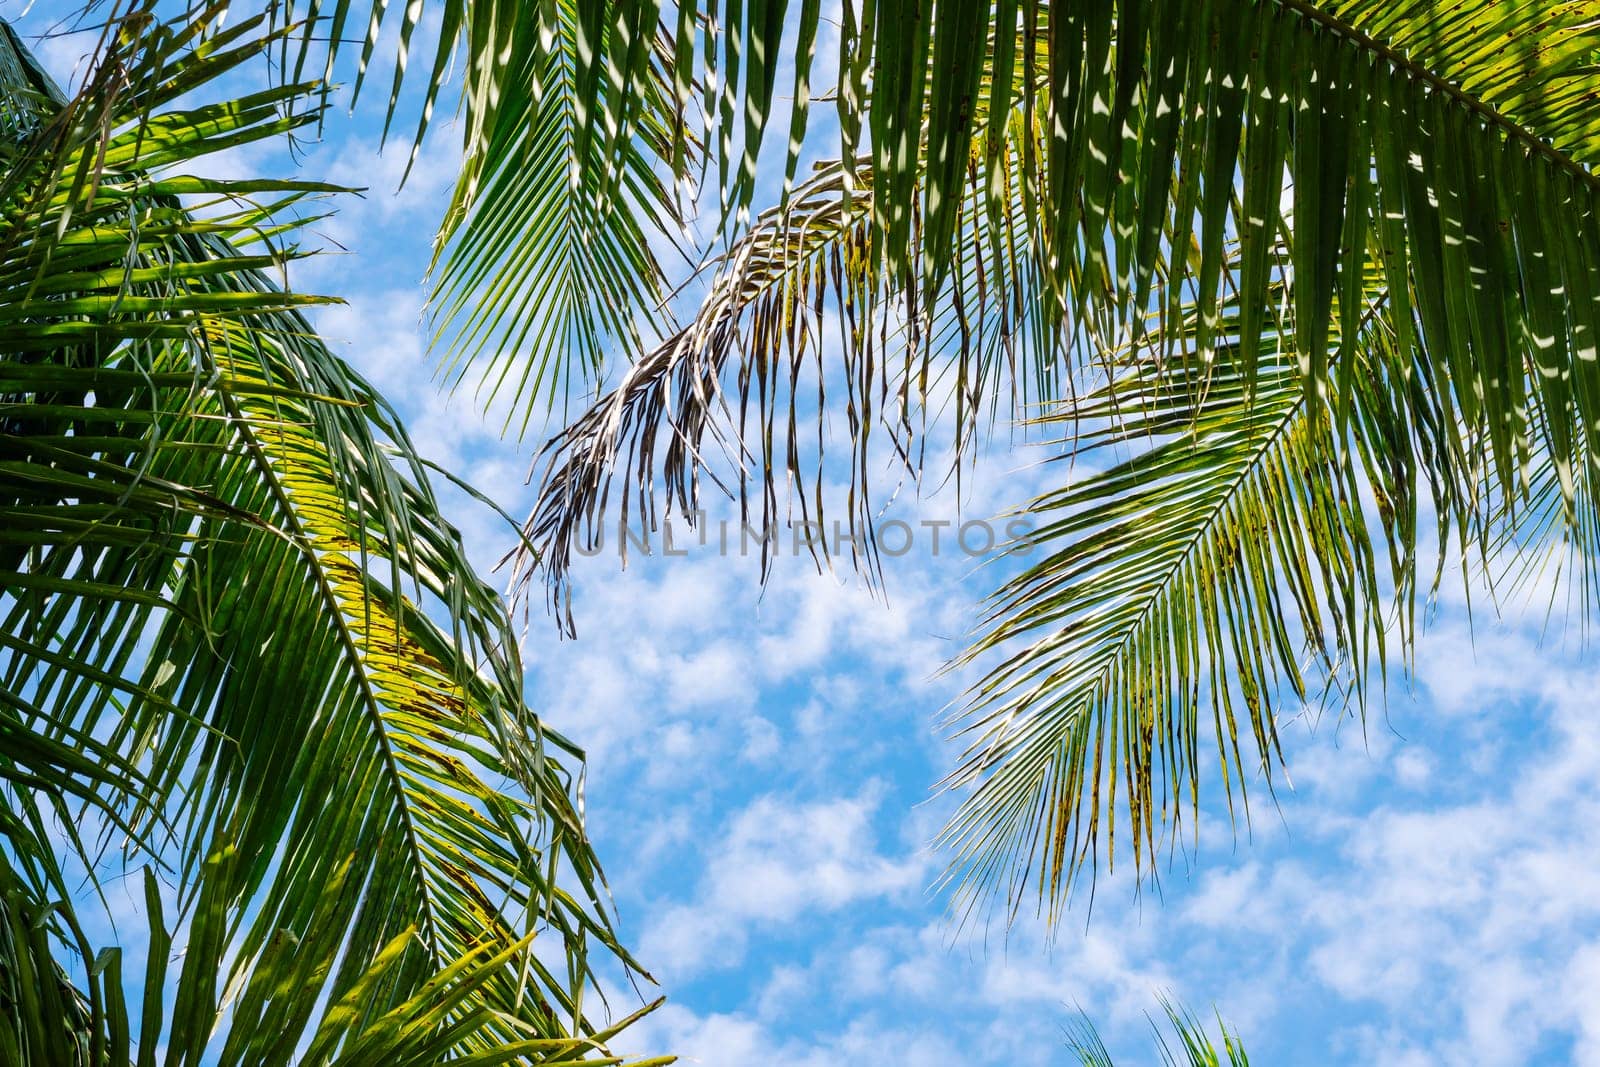 Coconut green tropical palm branches blue sky white clouds abstract background bright shiny sun day beautiful nature summer. Joy happiness harmony tranquility calm life.